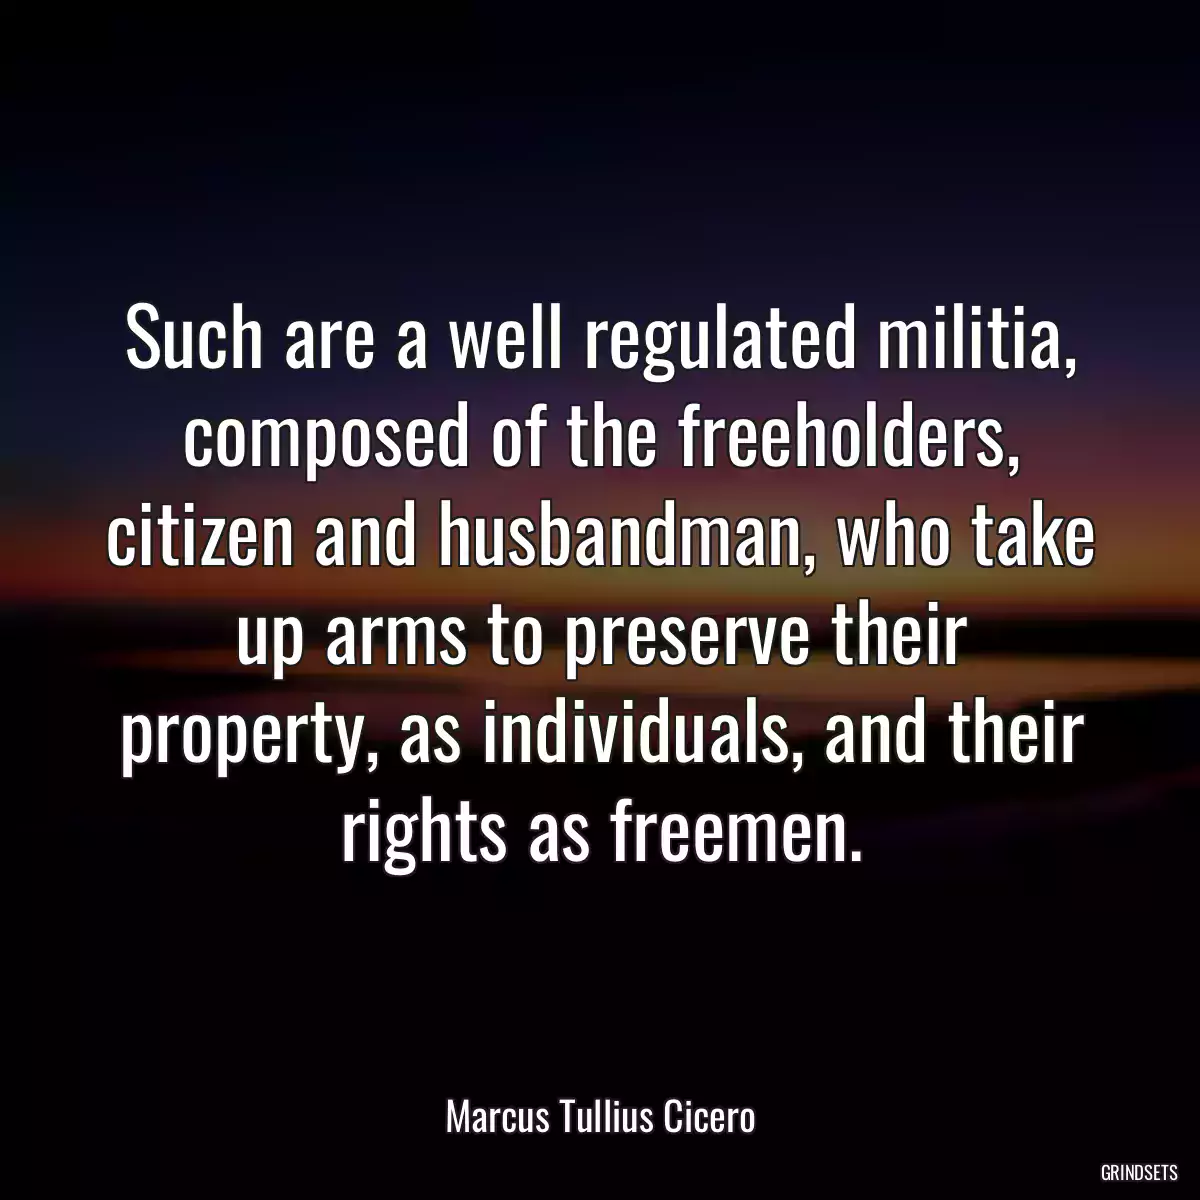 Such are a well regulated militia, composed of the freeholders, citizen and husbandman, who take up arms to preserve their property, as individuals, and their rights as freemen.